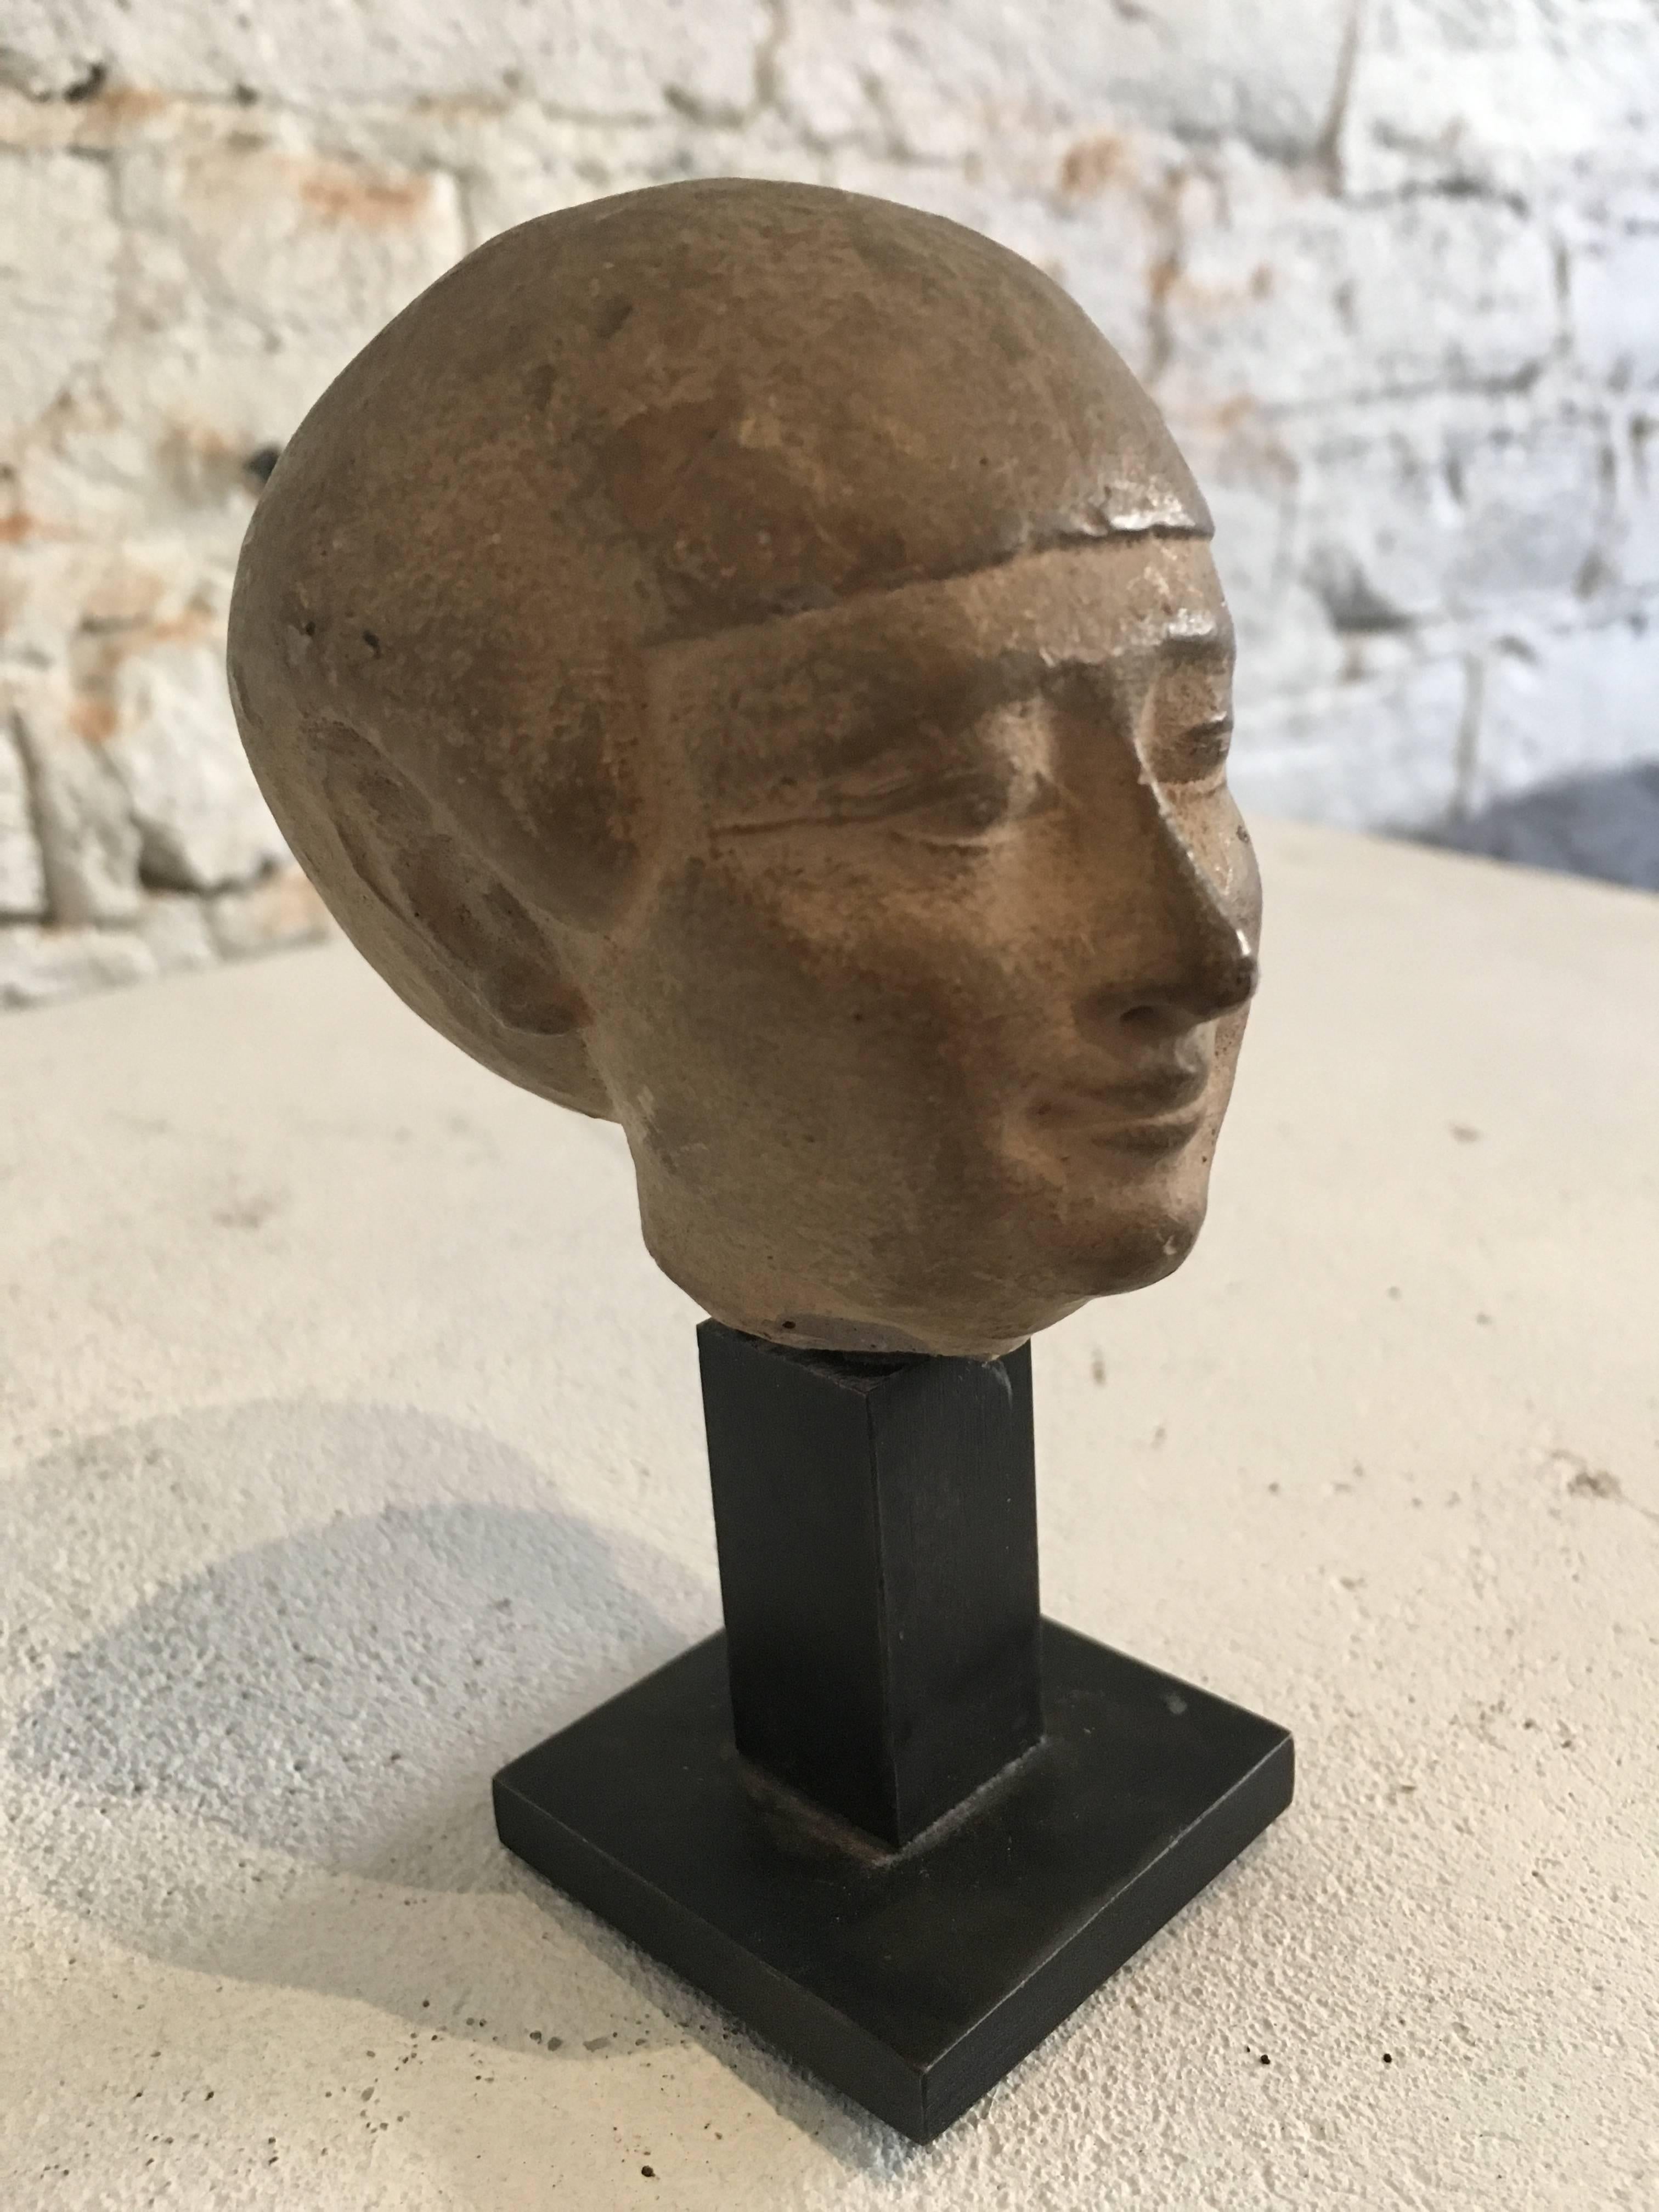 Ancient mounted stone head found in England
This object was found in England with little information regarding its age (probably 19th century), province (Looks Egyptian) and appears to be a fragment of a larger figure
It has been mounted as a